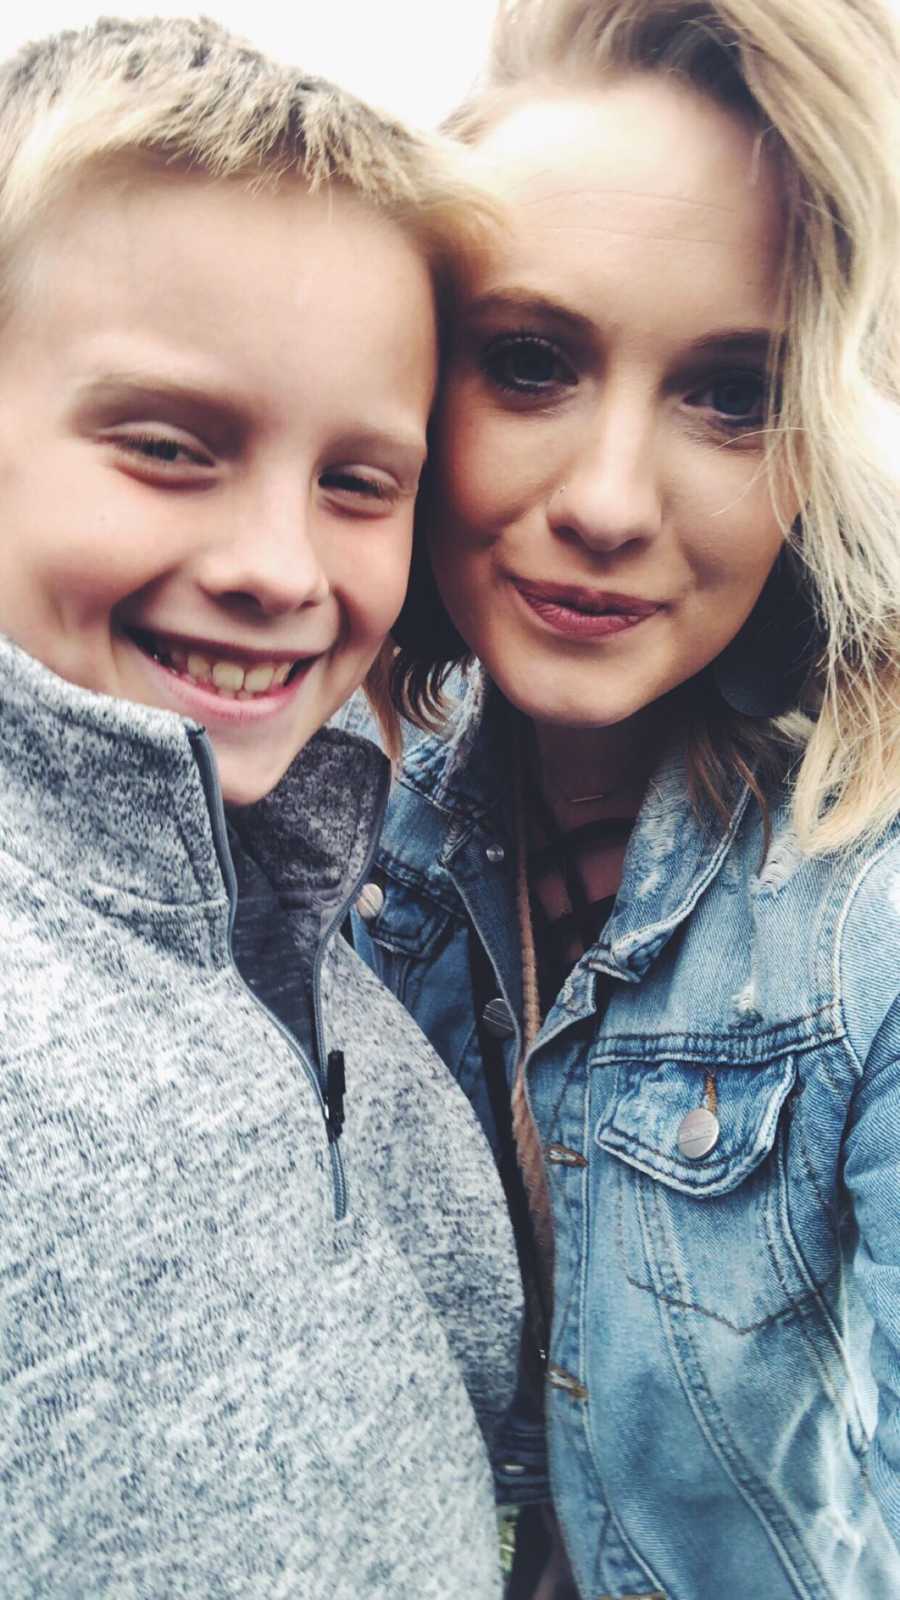 Young mom smiles in selfie beside her son